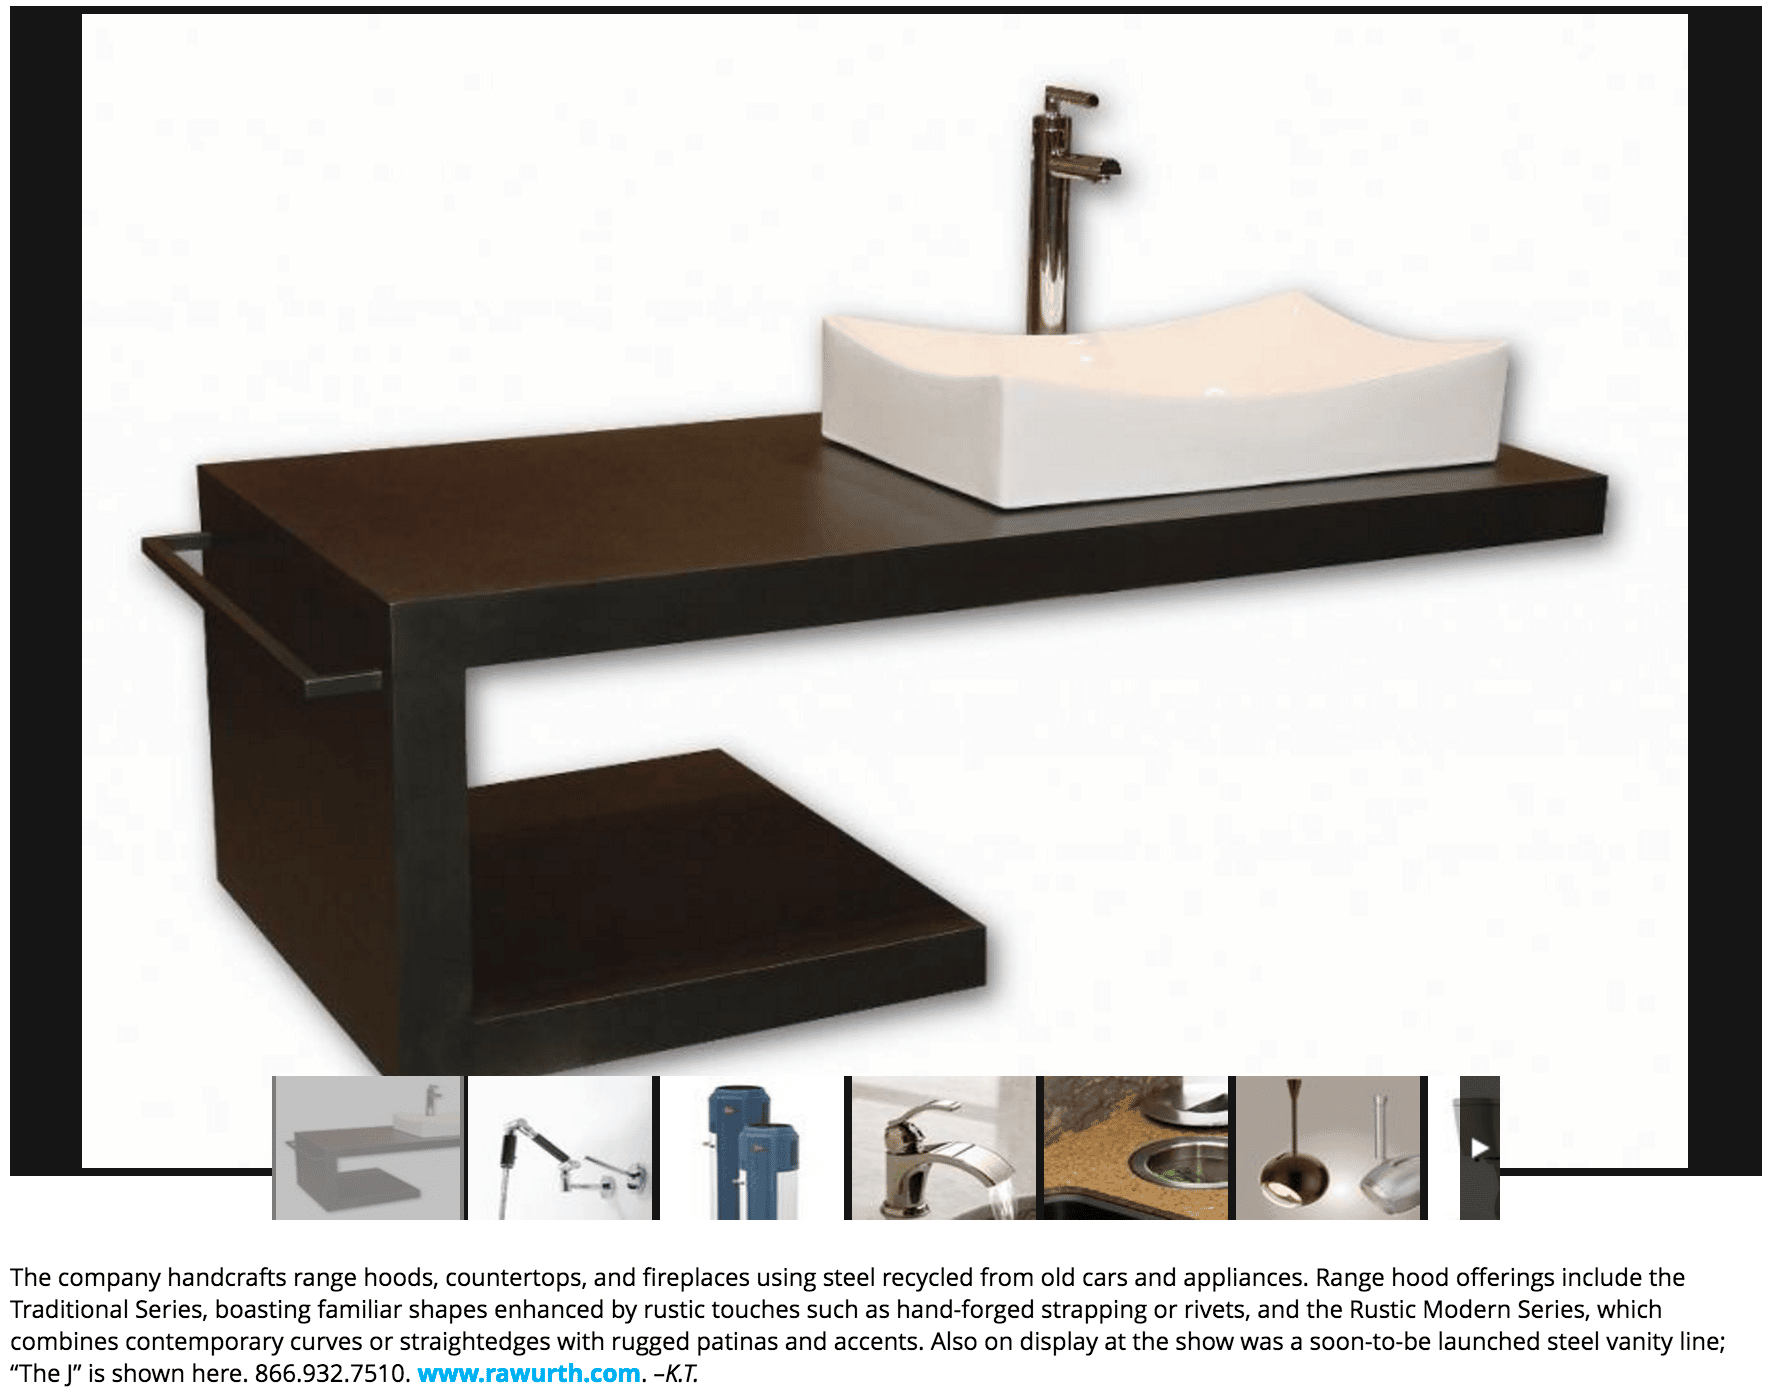 Residential Architect features our custom countertop and sink.